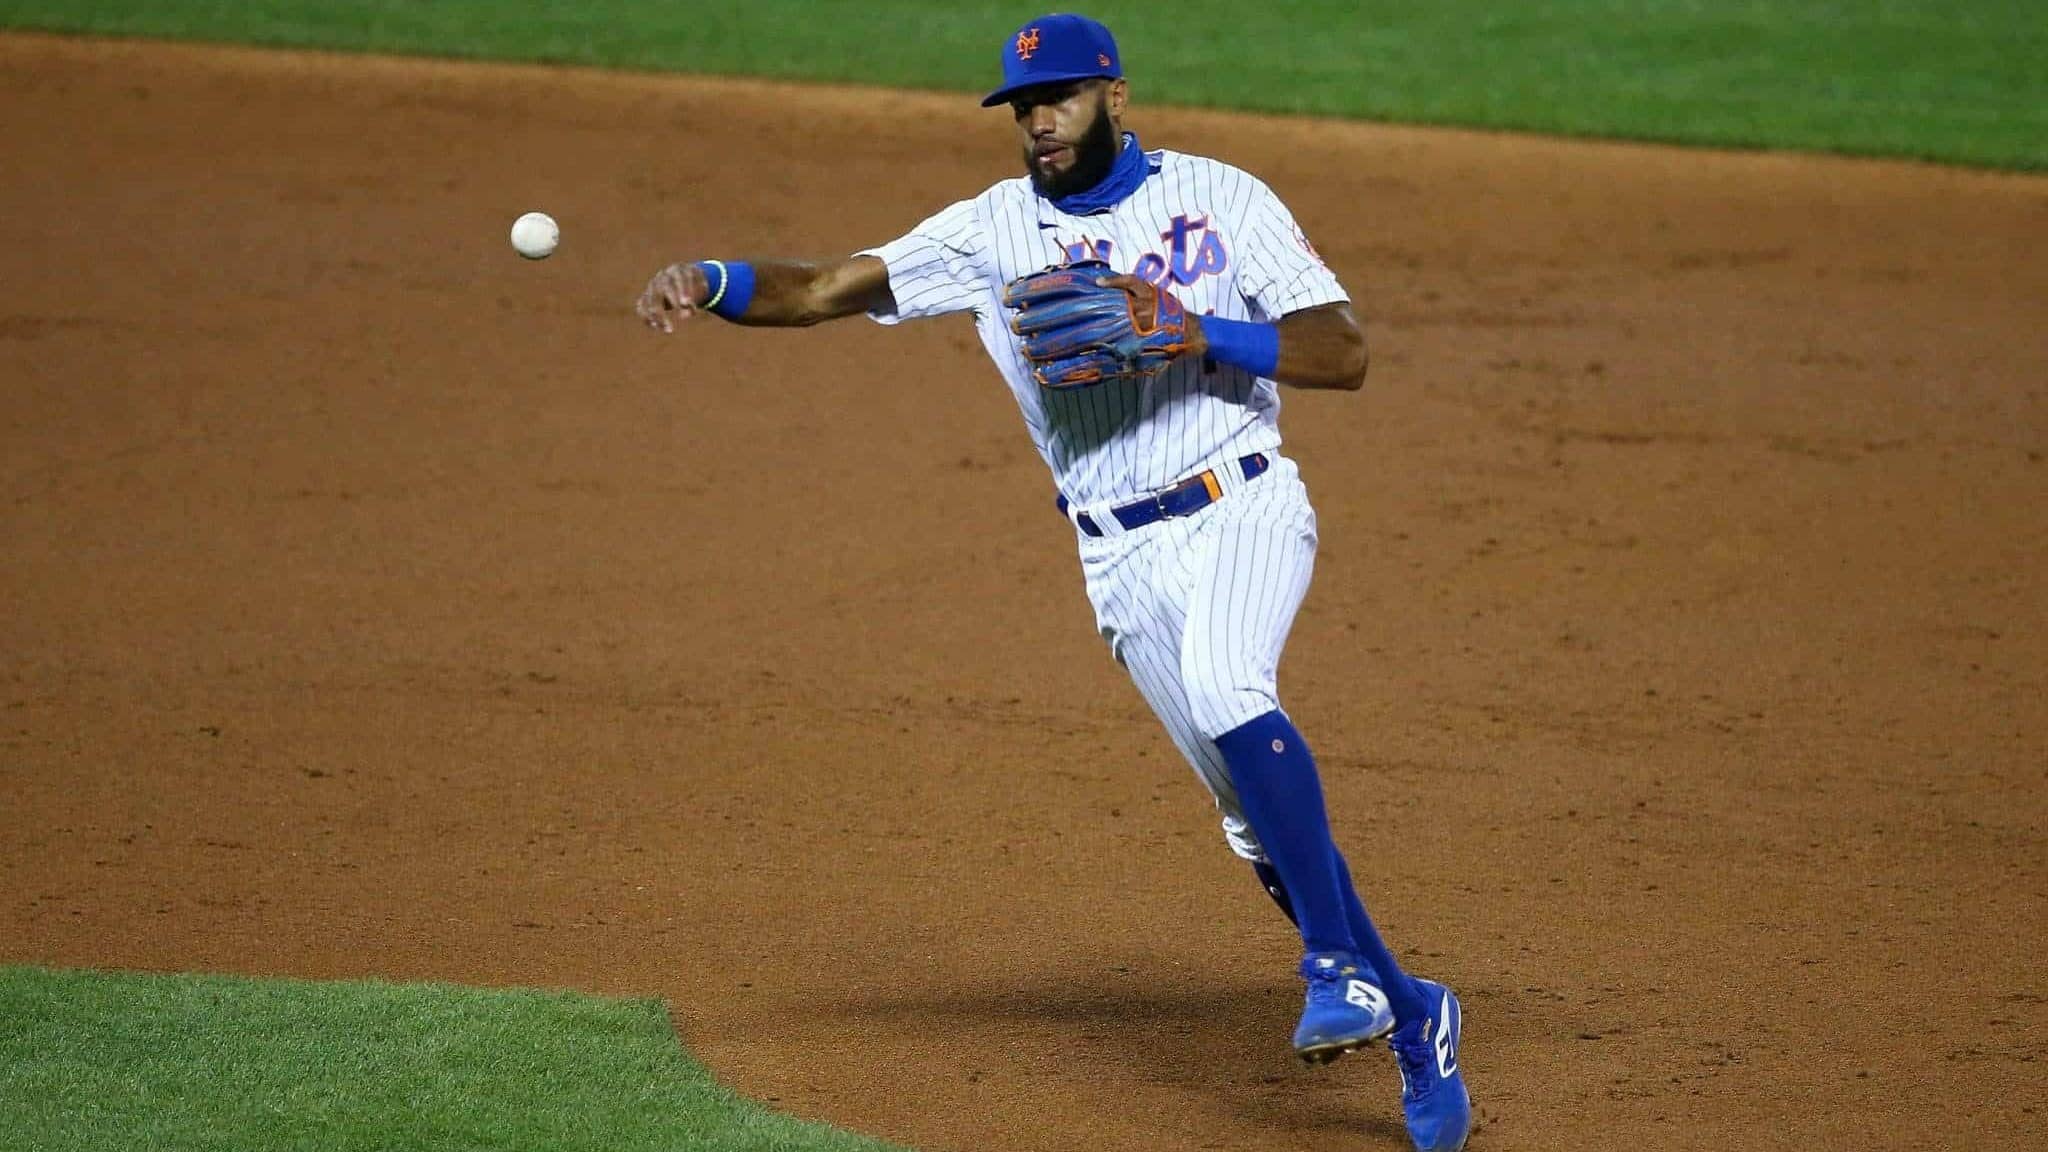 NEW YORK, NEW YORK - AUGUST 25: Amed Rosario #1 of the New York Mets field a ground ball off the bat of Jonathan Villar #2 of the Miami Marlins for an out in the second inning at Citi Field on August 25, 2020 in New York City.